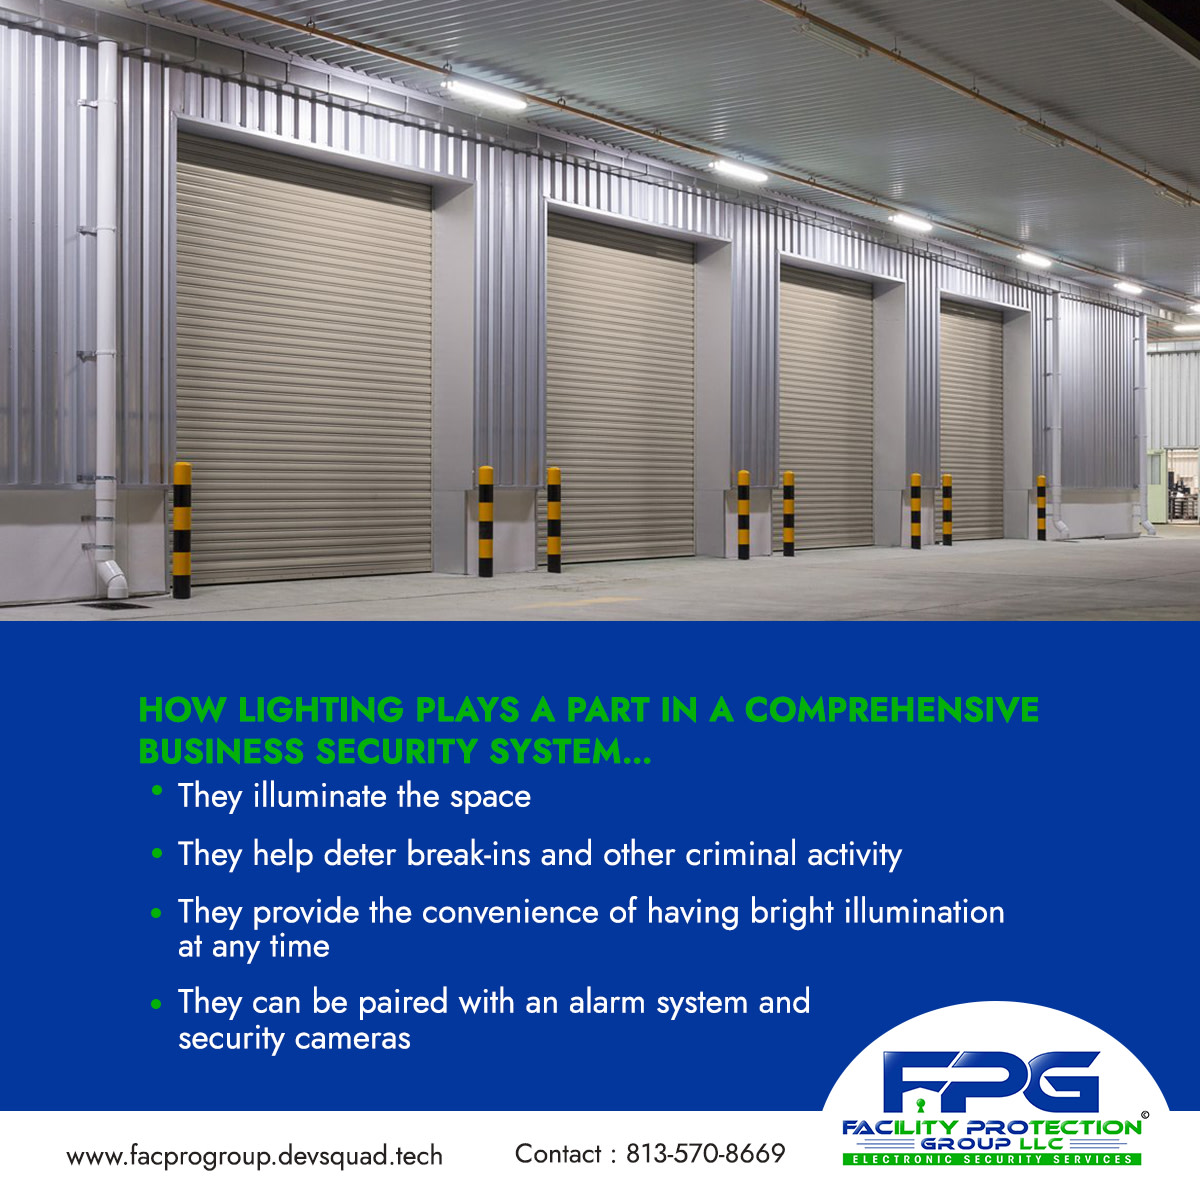 How Lighting Plays a Part in a Comprehensive Business Security System…
LEARN MORE... facprogroup.devsquad.tech/how-lighting-p…

#securitysystems #security #electronicsecurity #buildingsecurity #facilitysecurity #alarmsystems #accesscontrol #videosurveillance #intercoms  #tampa